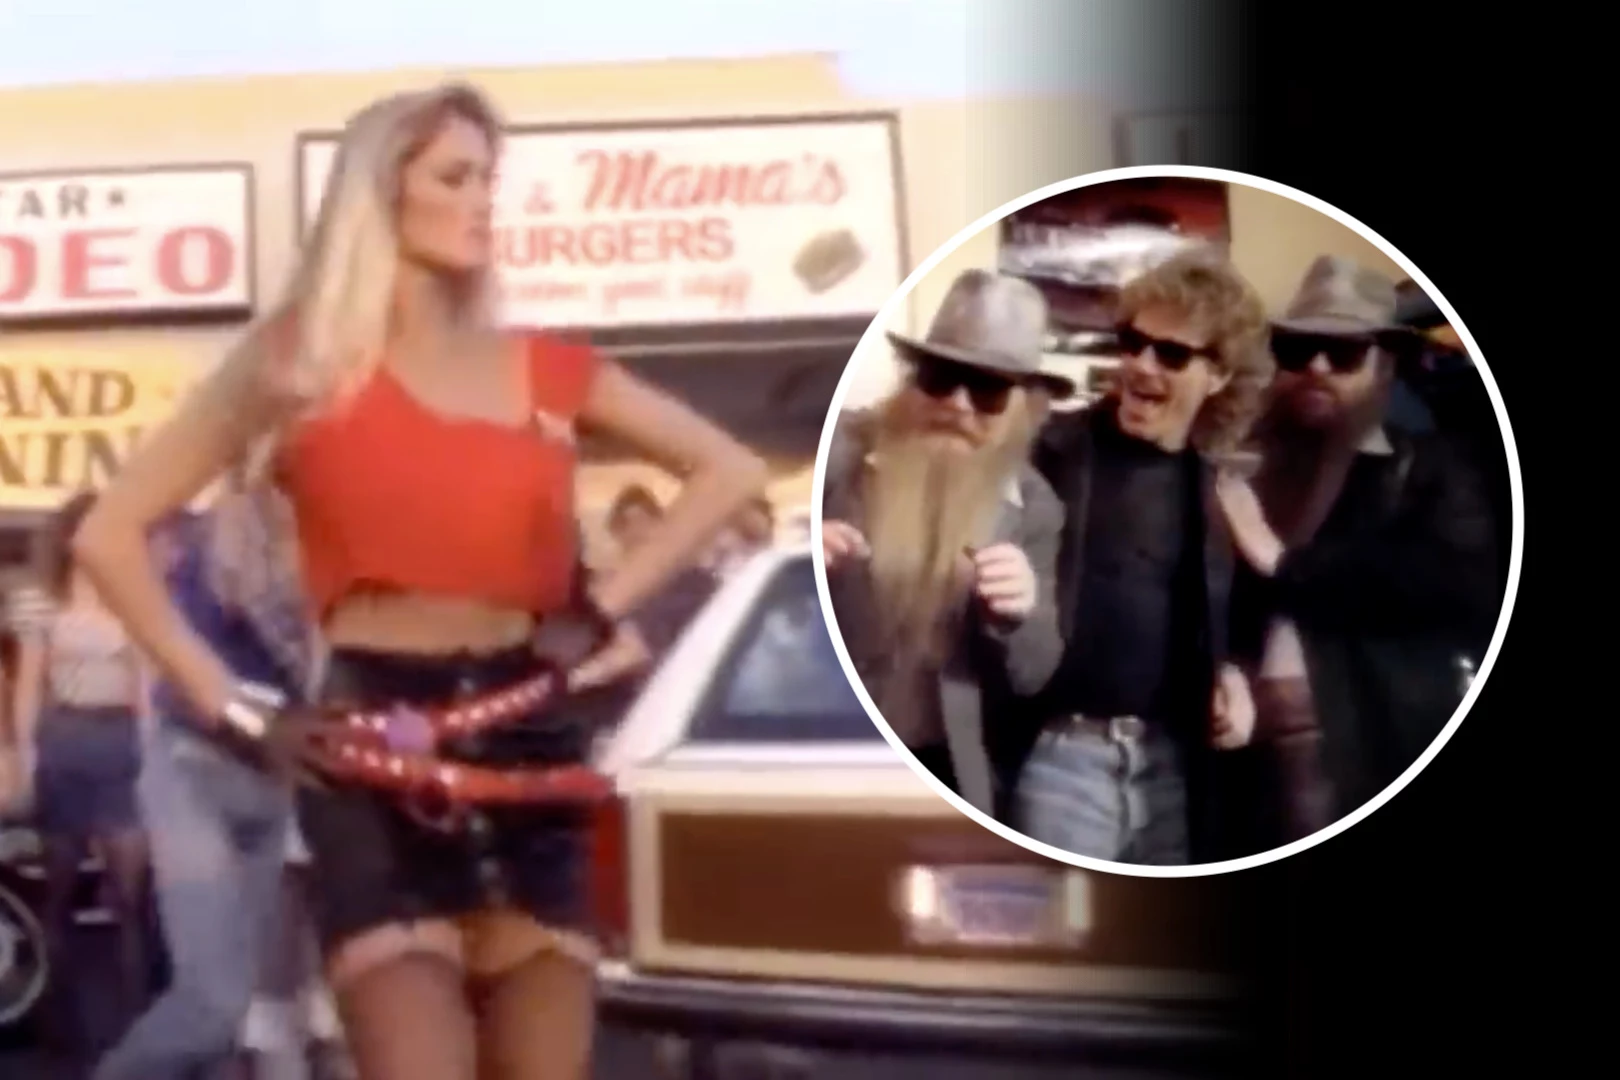 Kymberly Herrin, Star of ZZ Top's 'Legs' Video, Has Died at 65